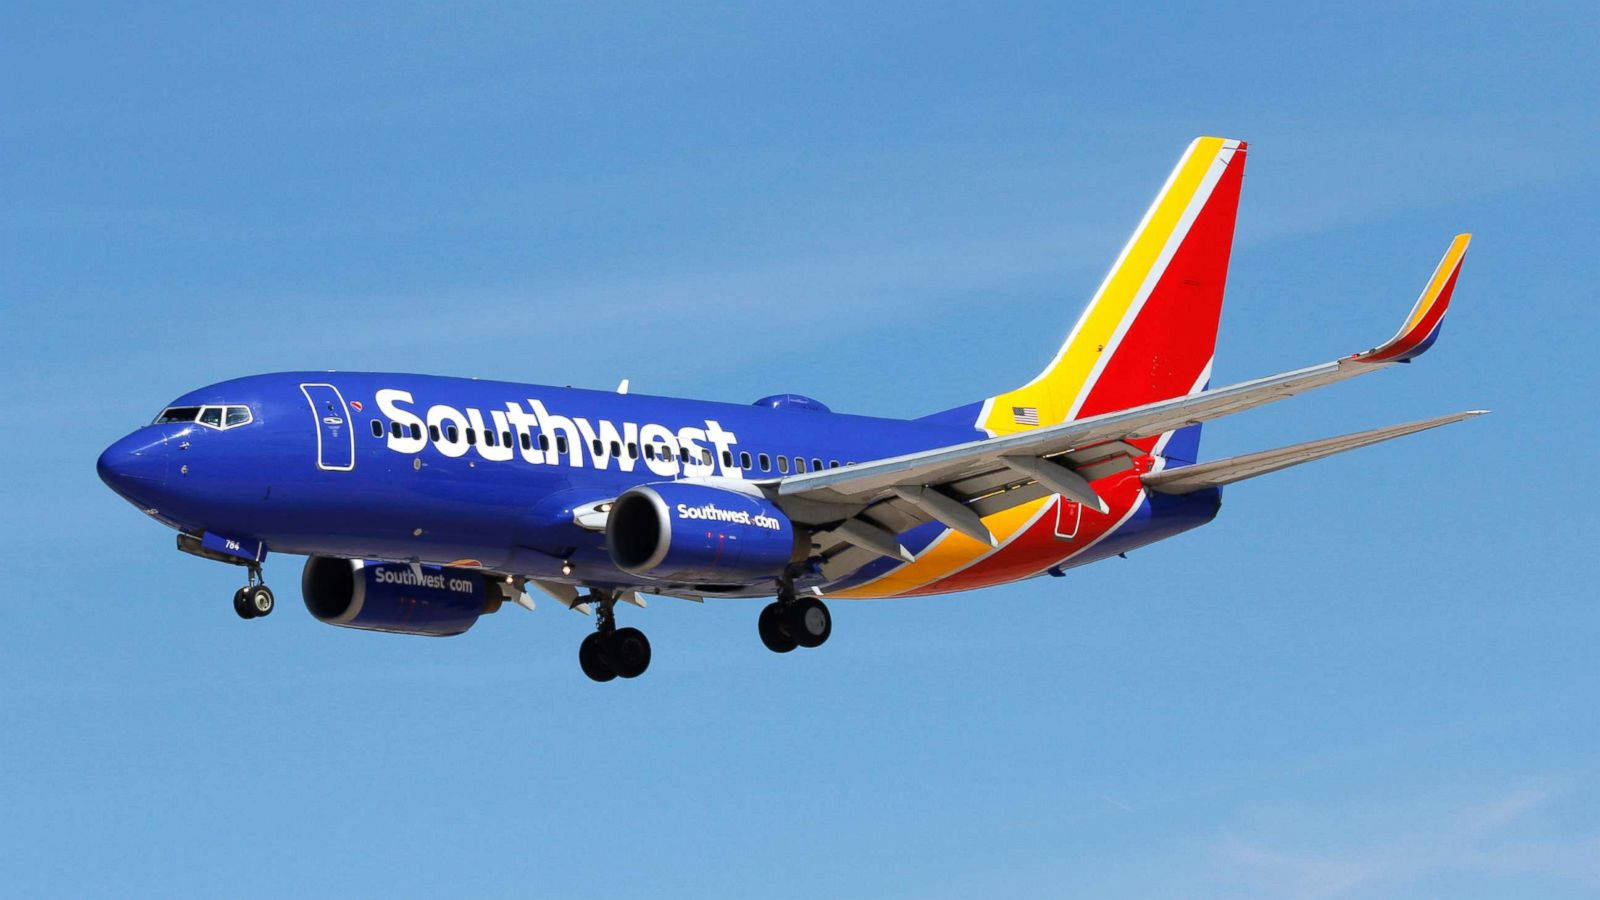 Southwest Airlines Airplane On Blue Sky Wallpaper